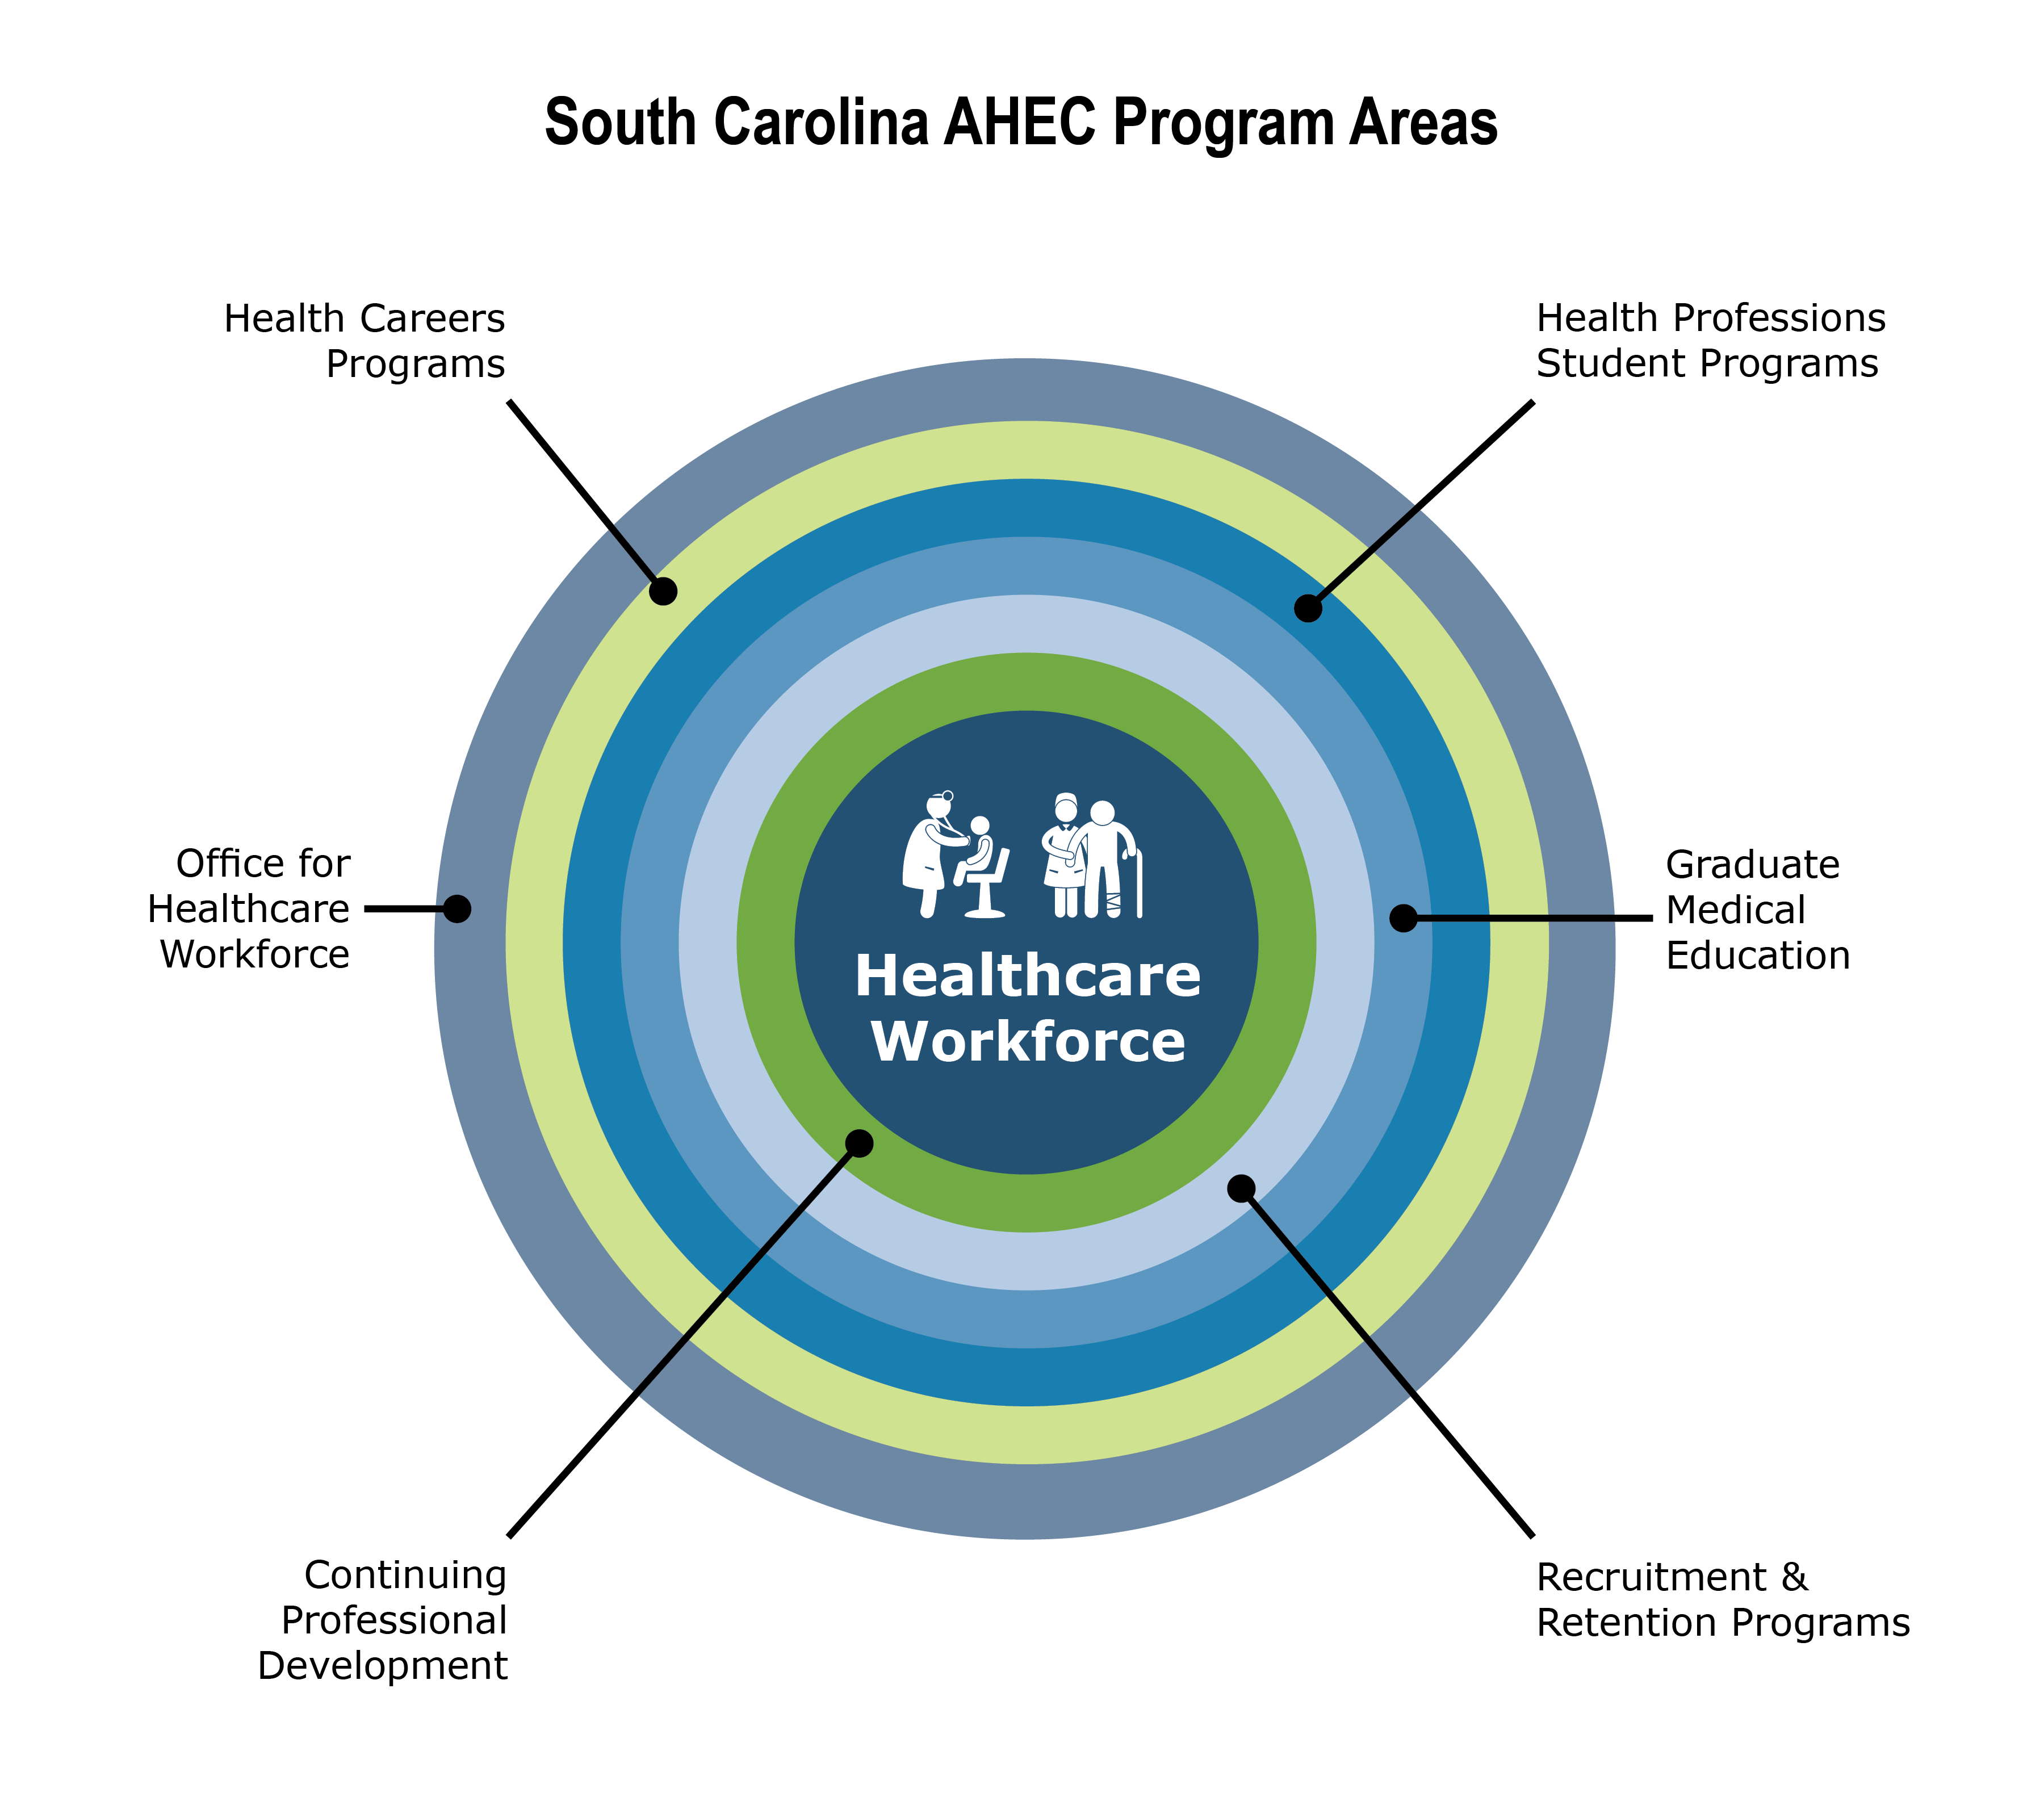 SC AHEC programs support all points along the health professions pipeline